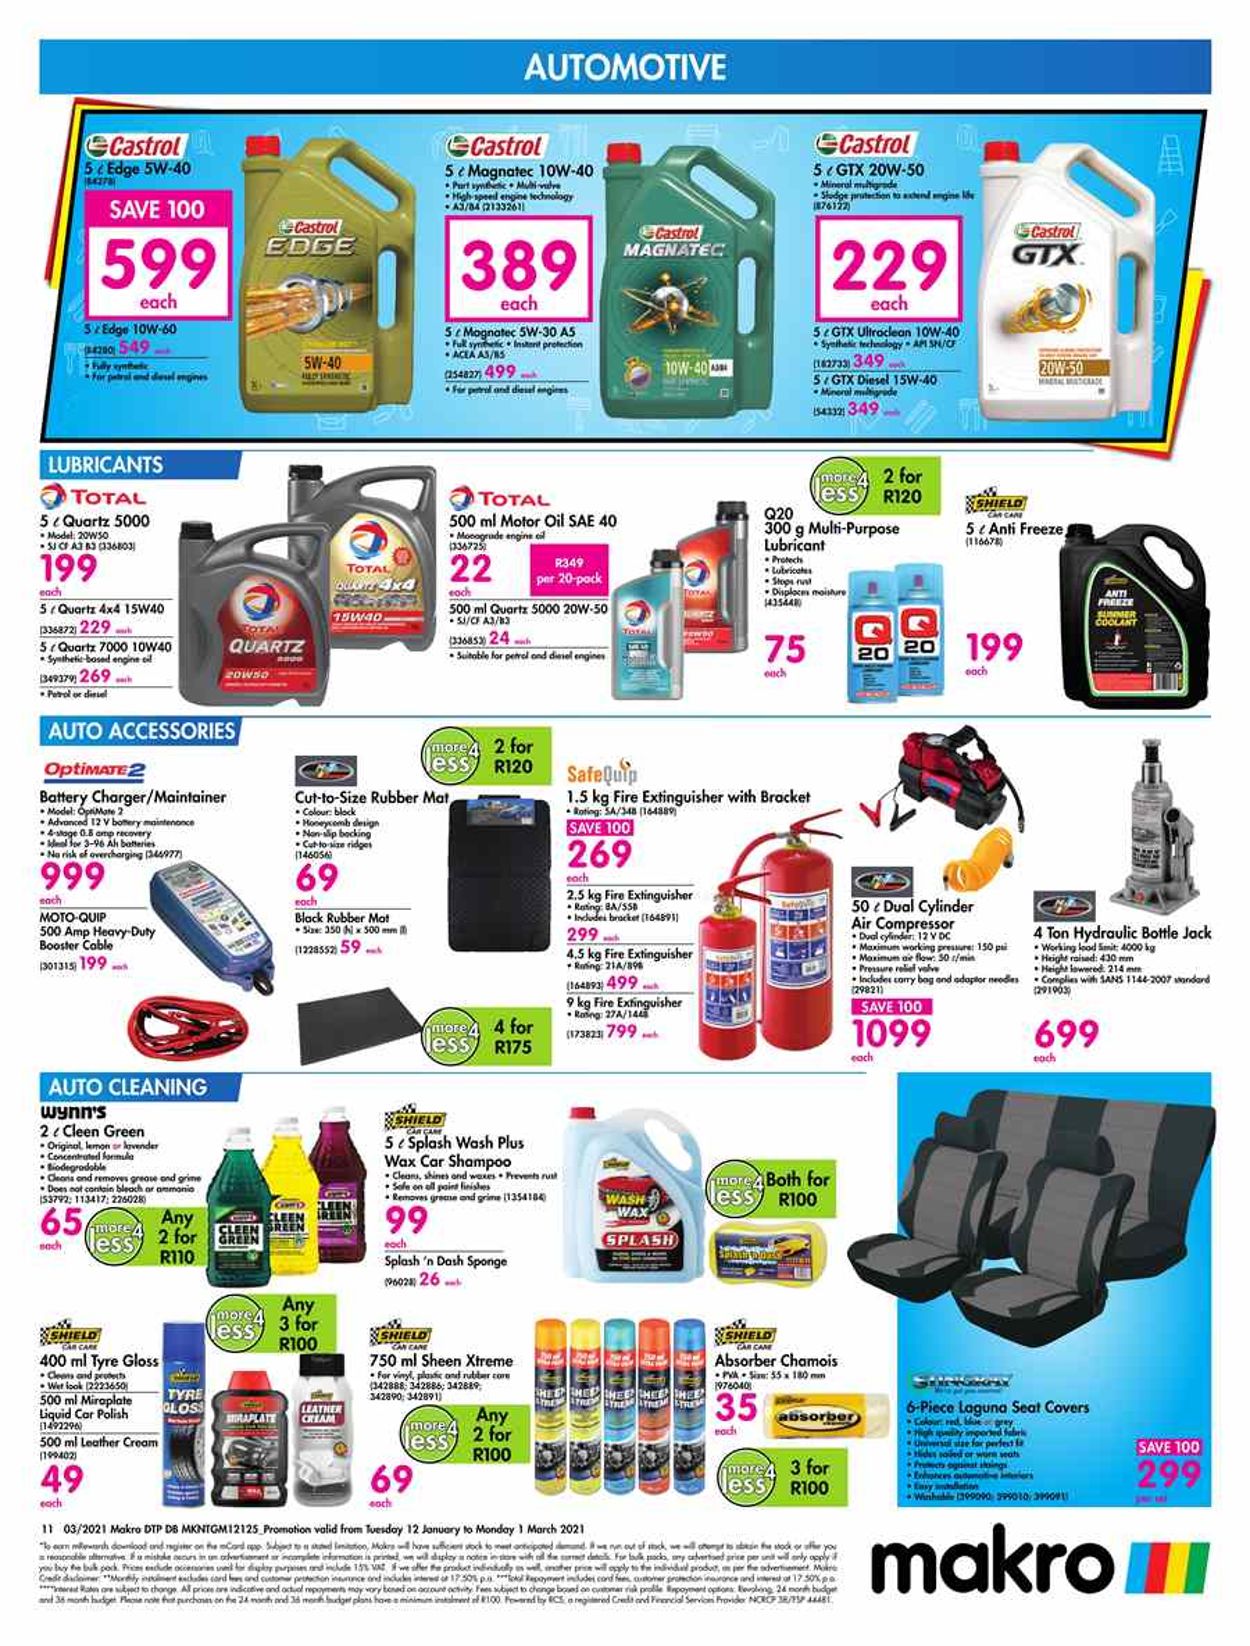 Makro Back to Site 2021 Catalogue - 2021/01/12-2021/03/01 (Page 11)